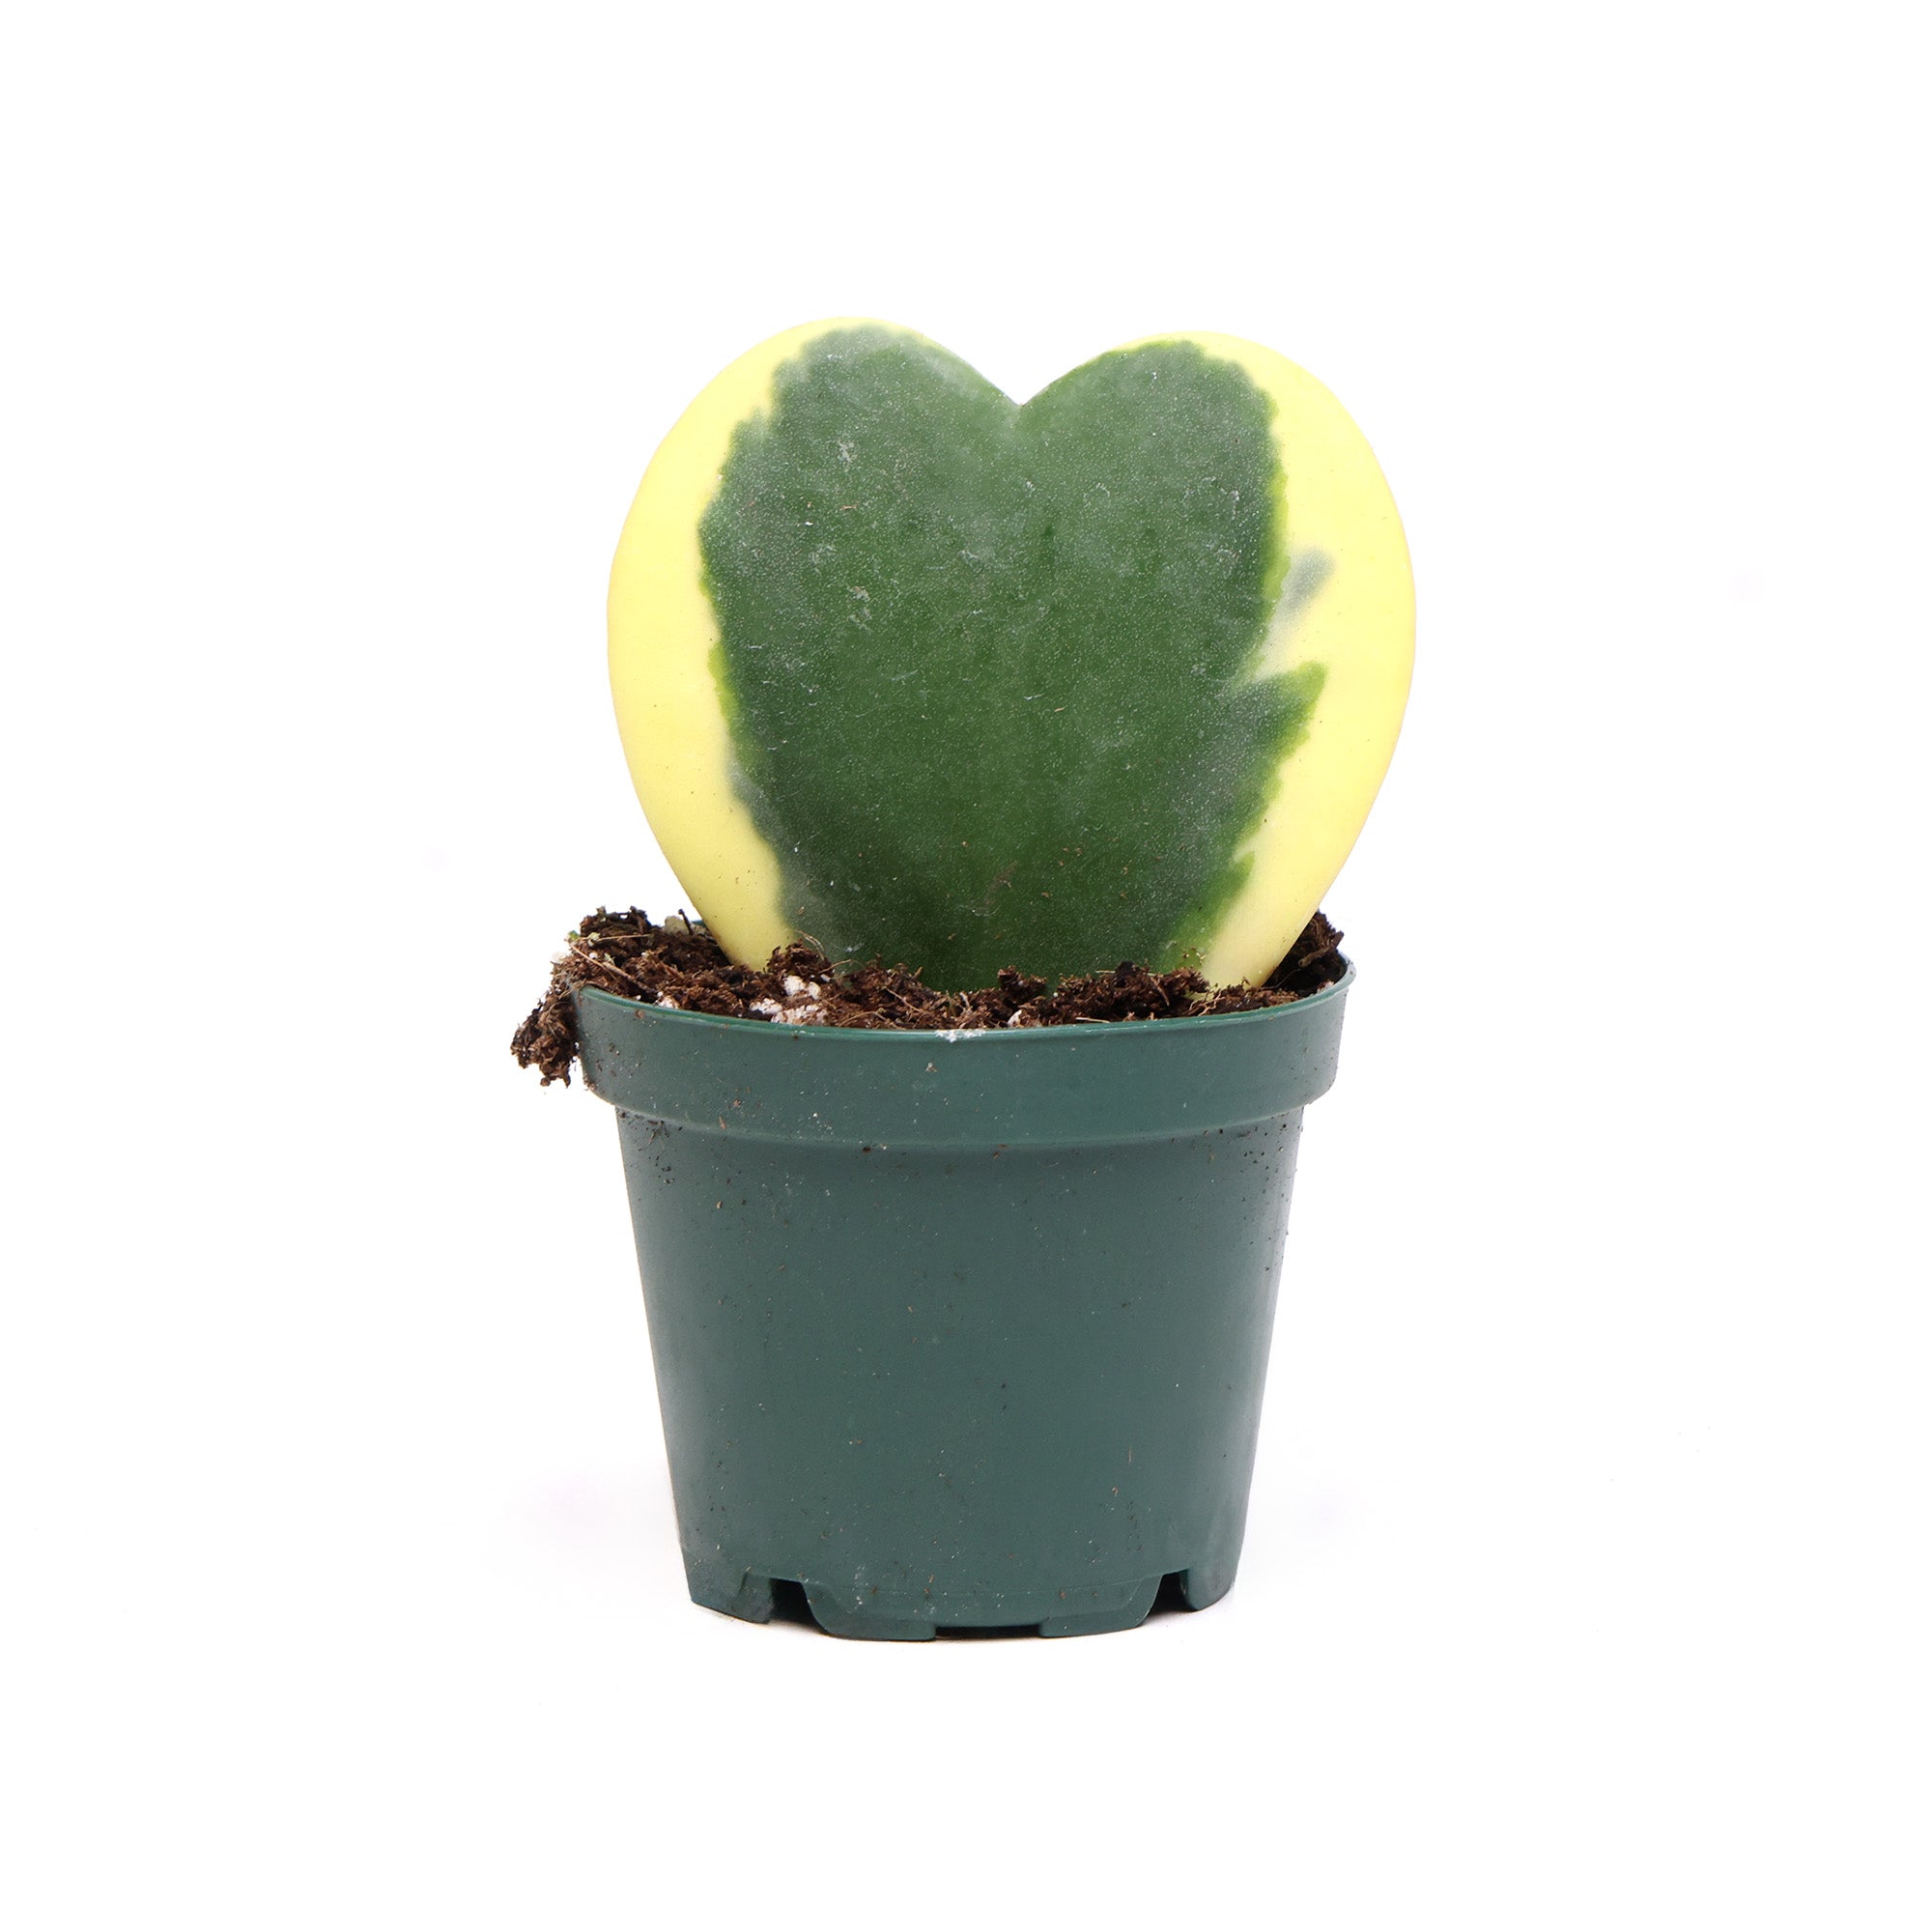 A small heart-shaped succulent with yellow and green leaves, planted in a Chive Studio green plastic pot against a white background.